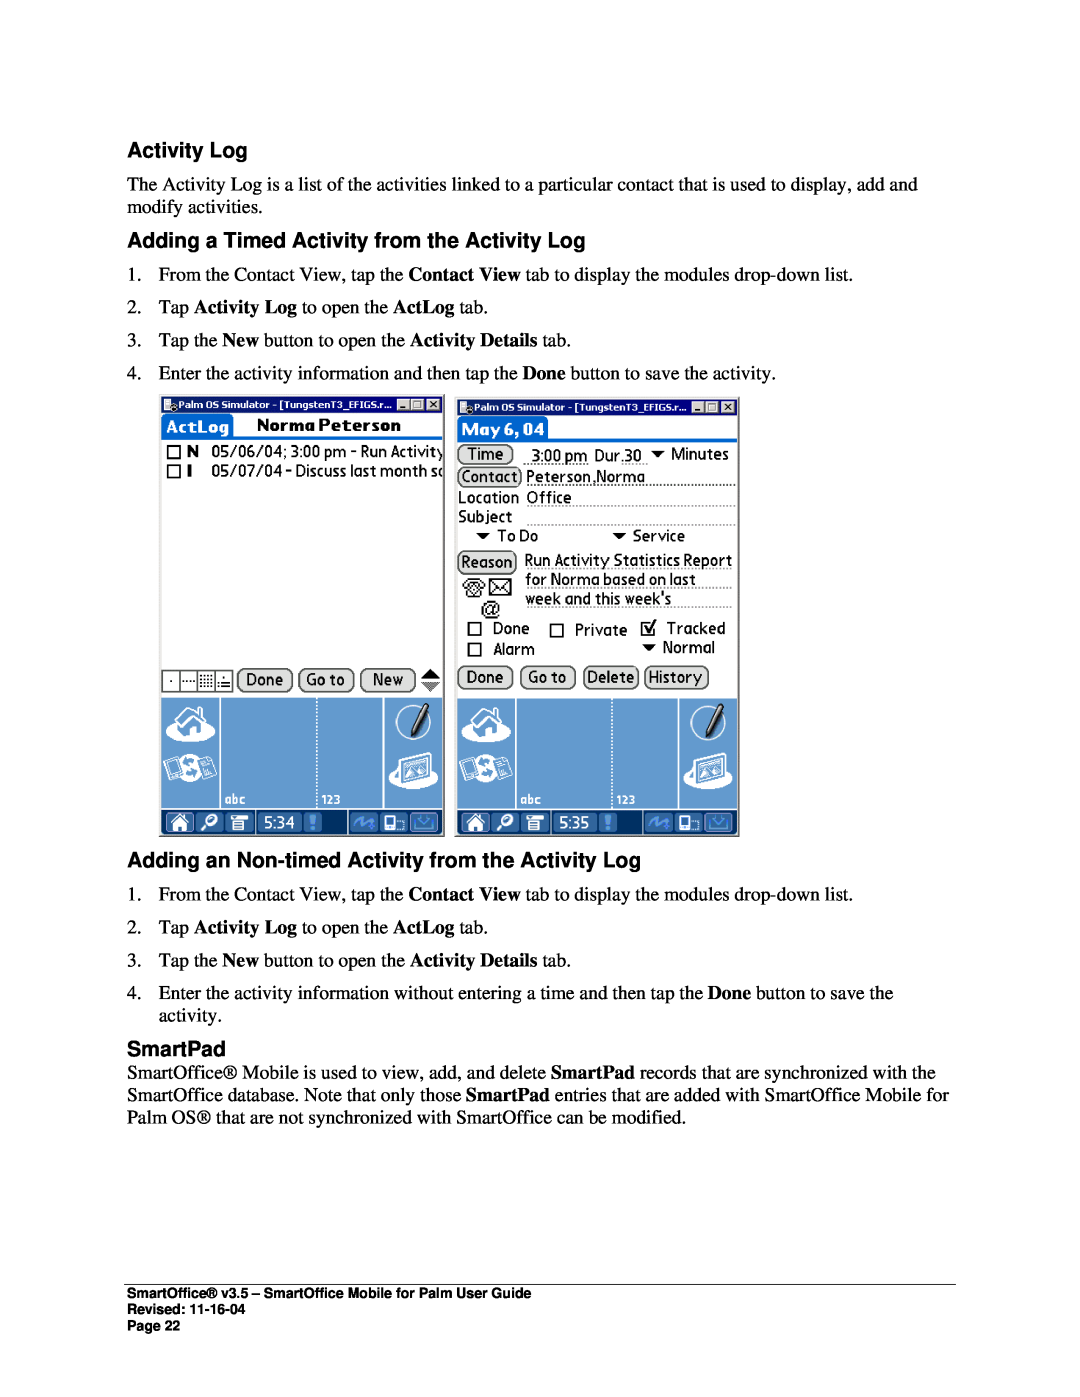 Palm SmartOffice Mobile manual Adding a Timed Activity from the Activity Log, SmartPad 